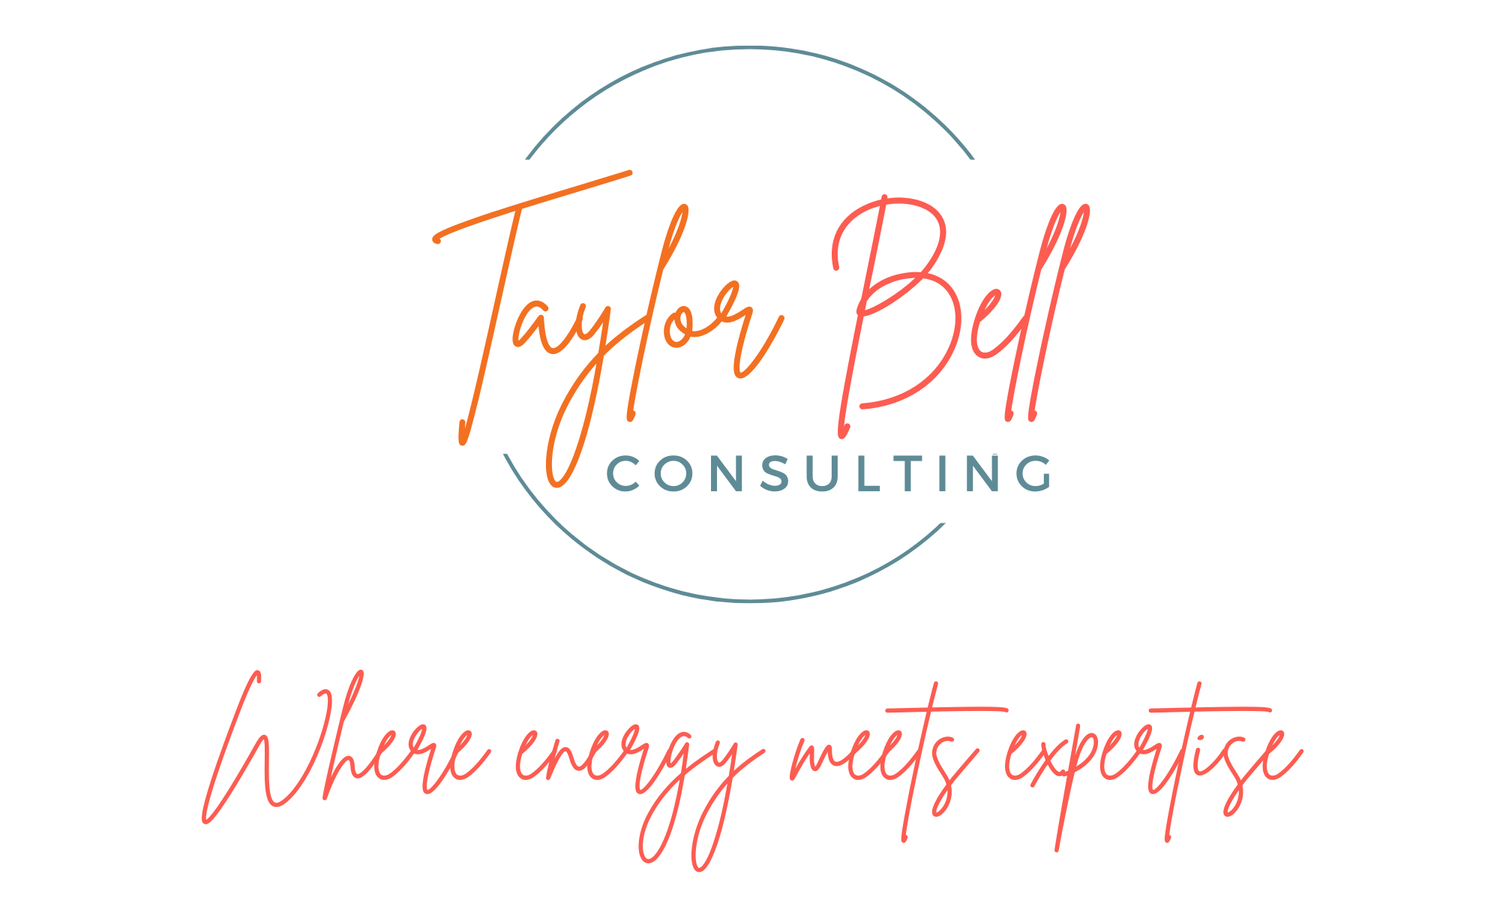 Taylor Bell Consulting